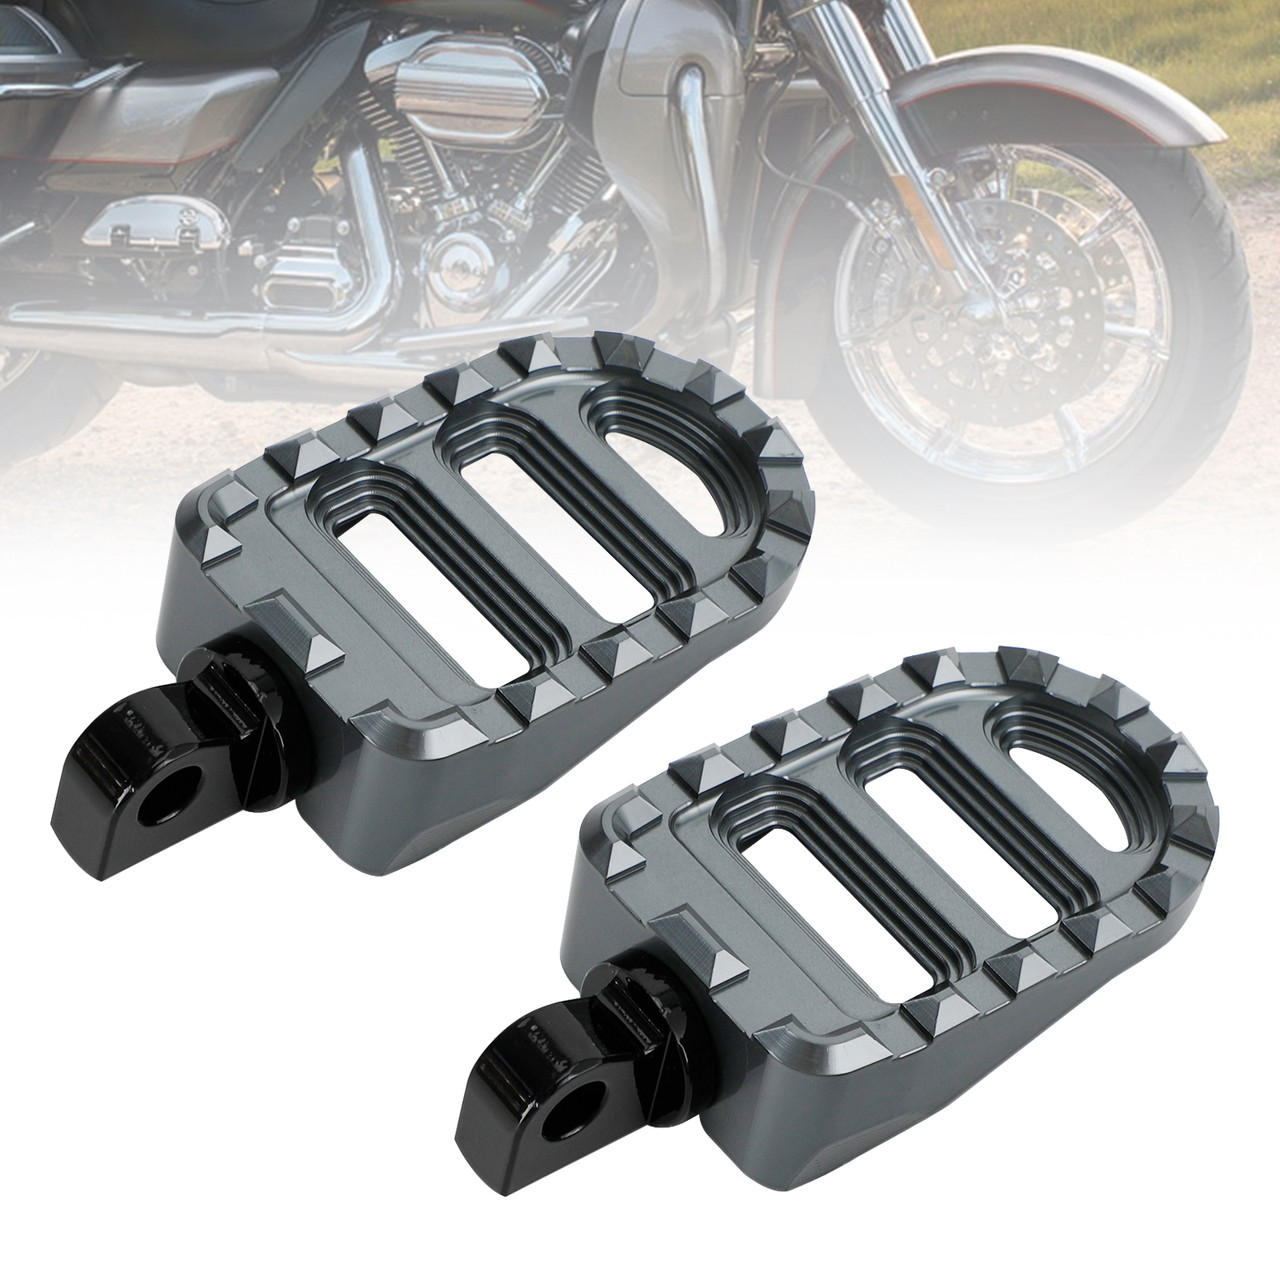 Front Footrests Foot Peg fit for Dyna Sportster 883 Electra Glide Road Glide TI